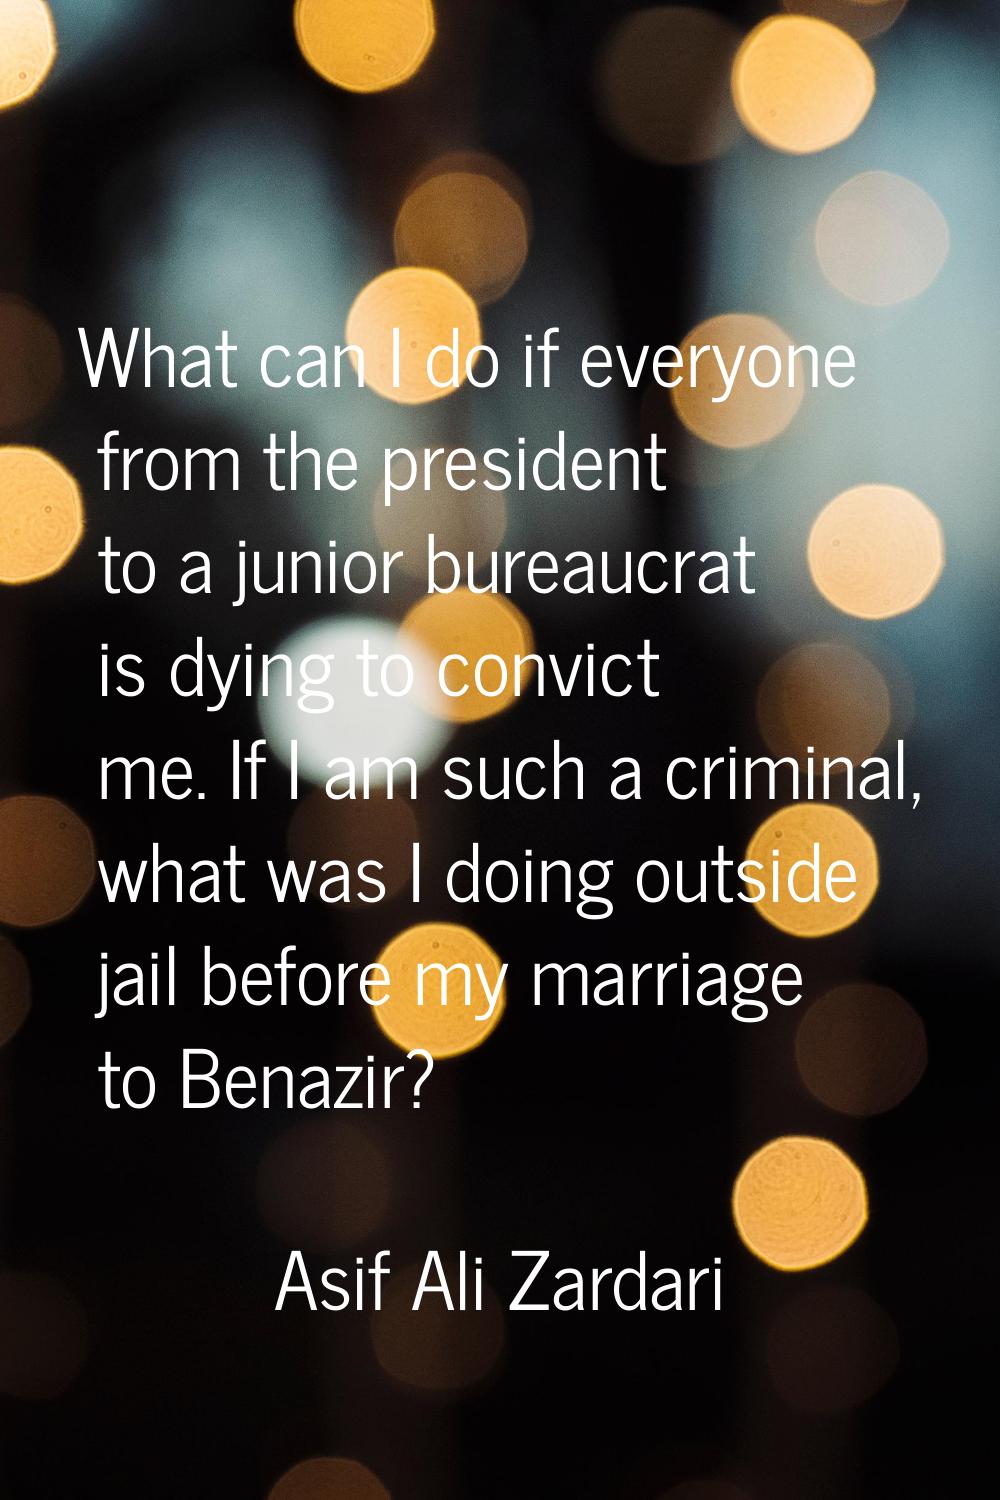 What can I do if everyone from the president to a junior bureaucrat is dying to convict me. If I am